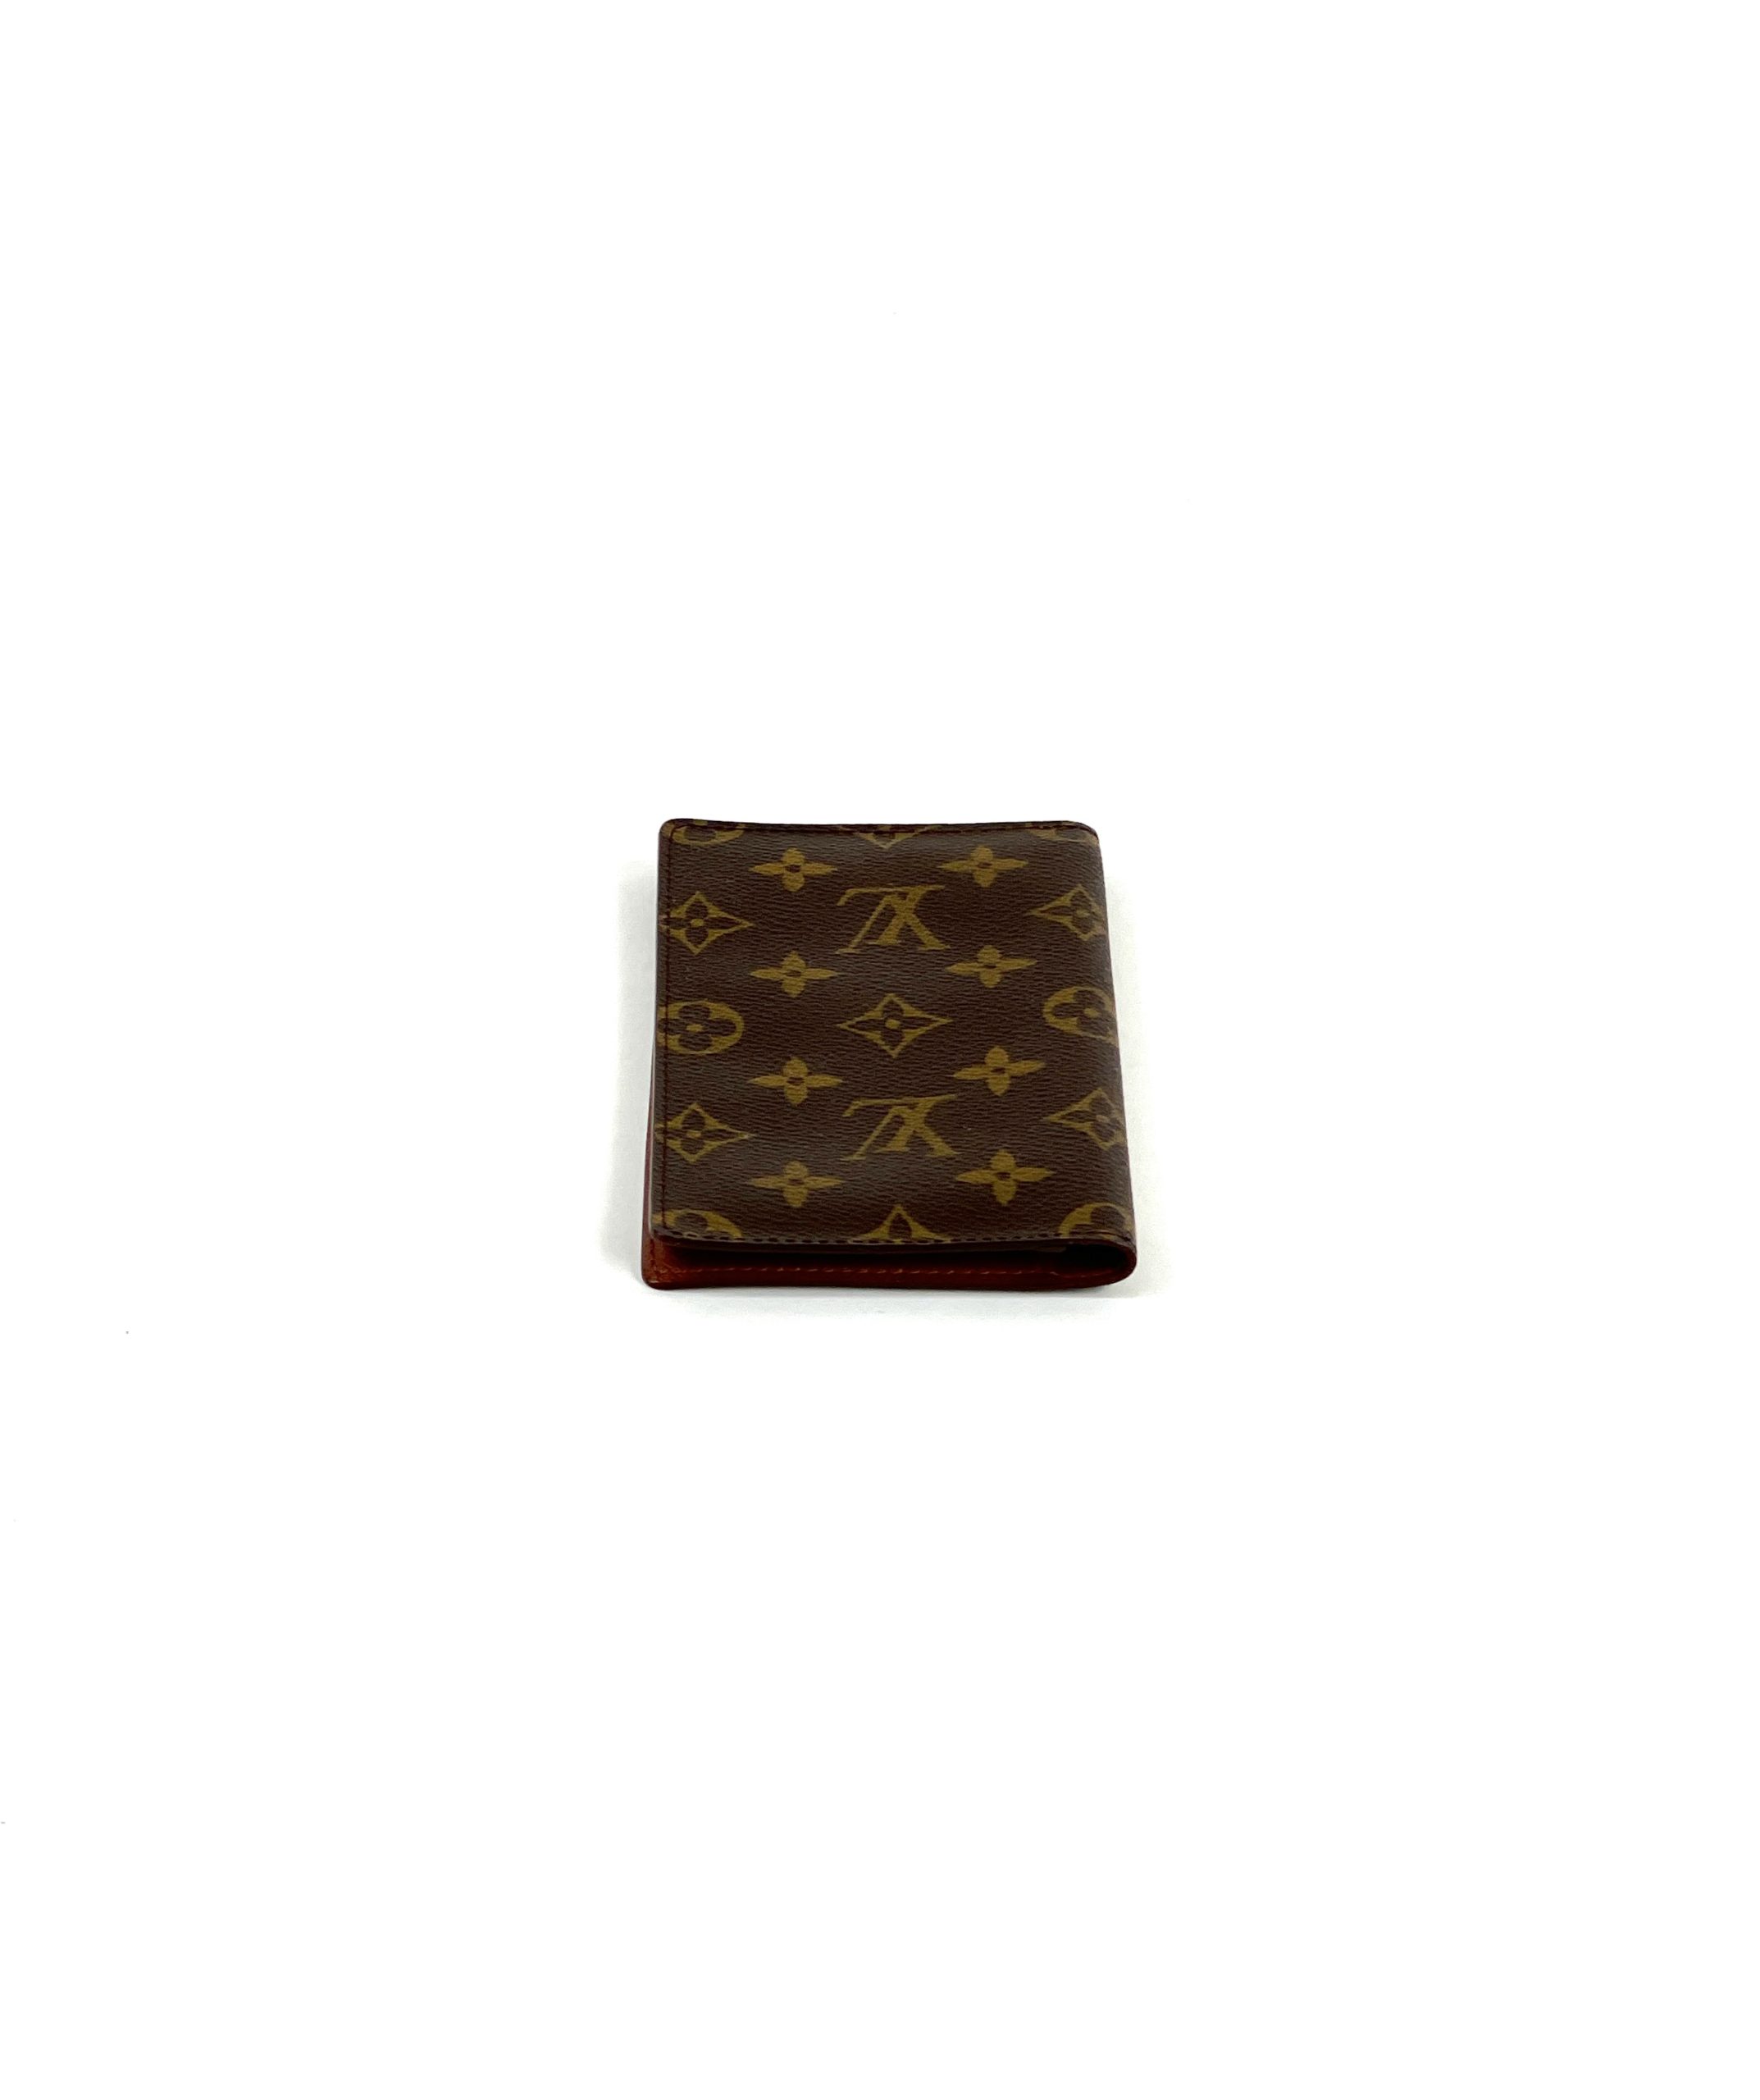 How to use the Louis Vuitton Pocket Agenda as a wallet/checkbook cover!! 